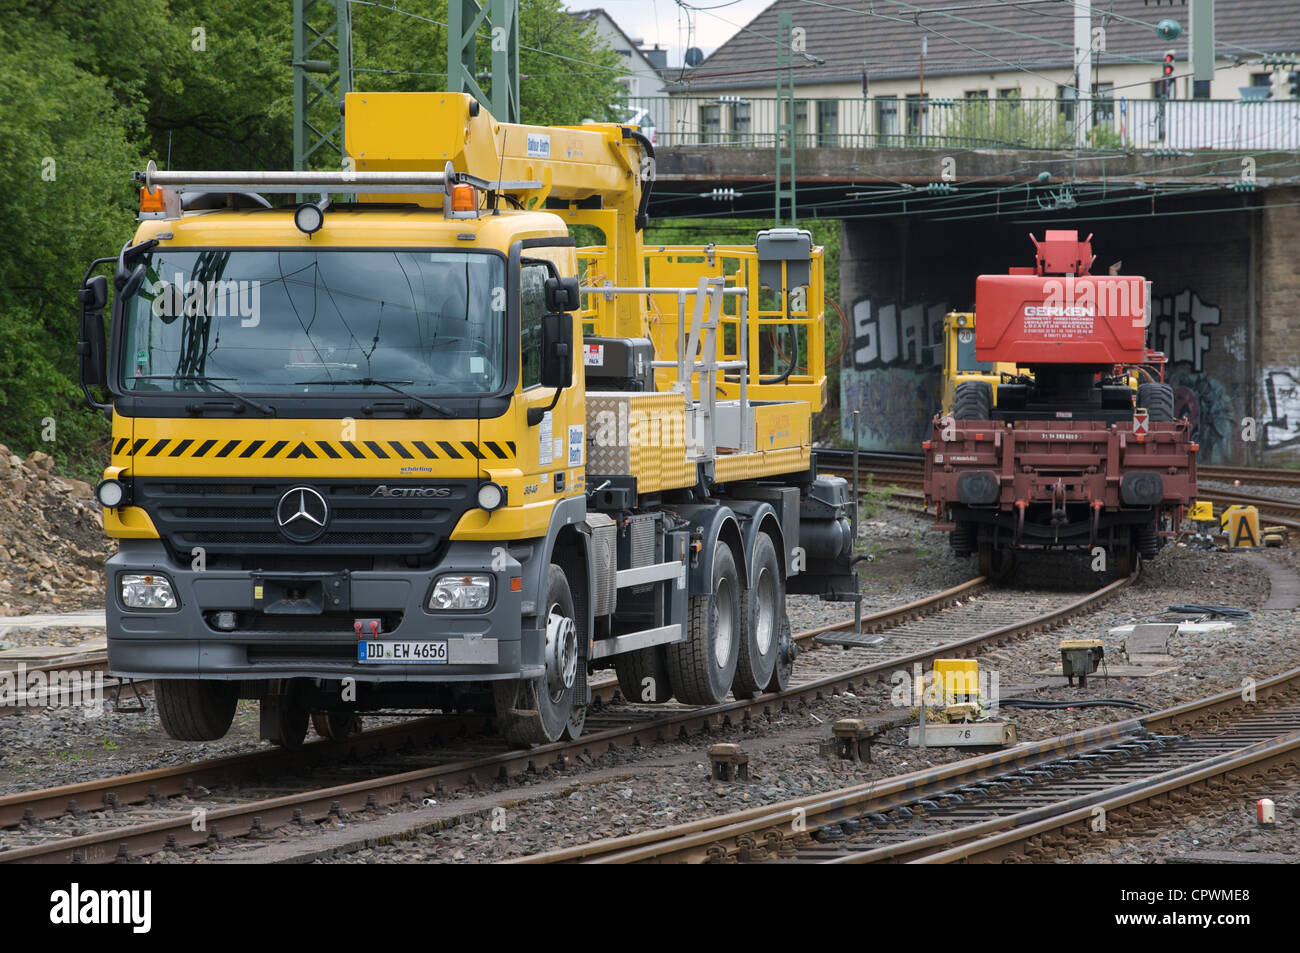 Mercedes-Benz Actros 3346 railer (road-Rail) vehicle which is used for railway maintenance, Solingen, Germany. Stock Photo